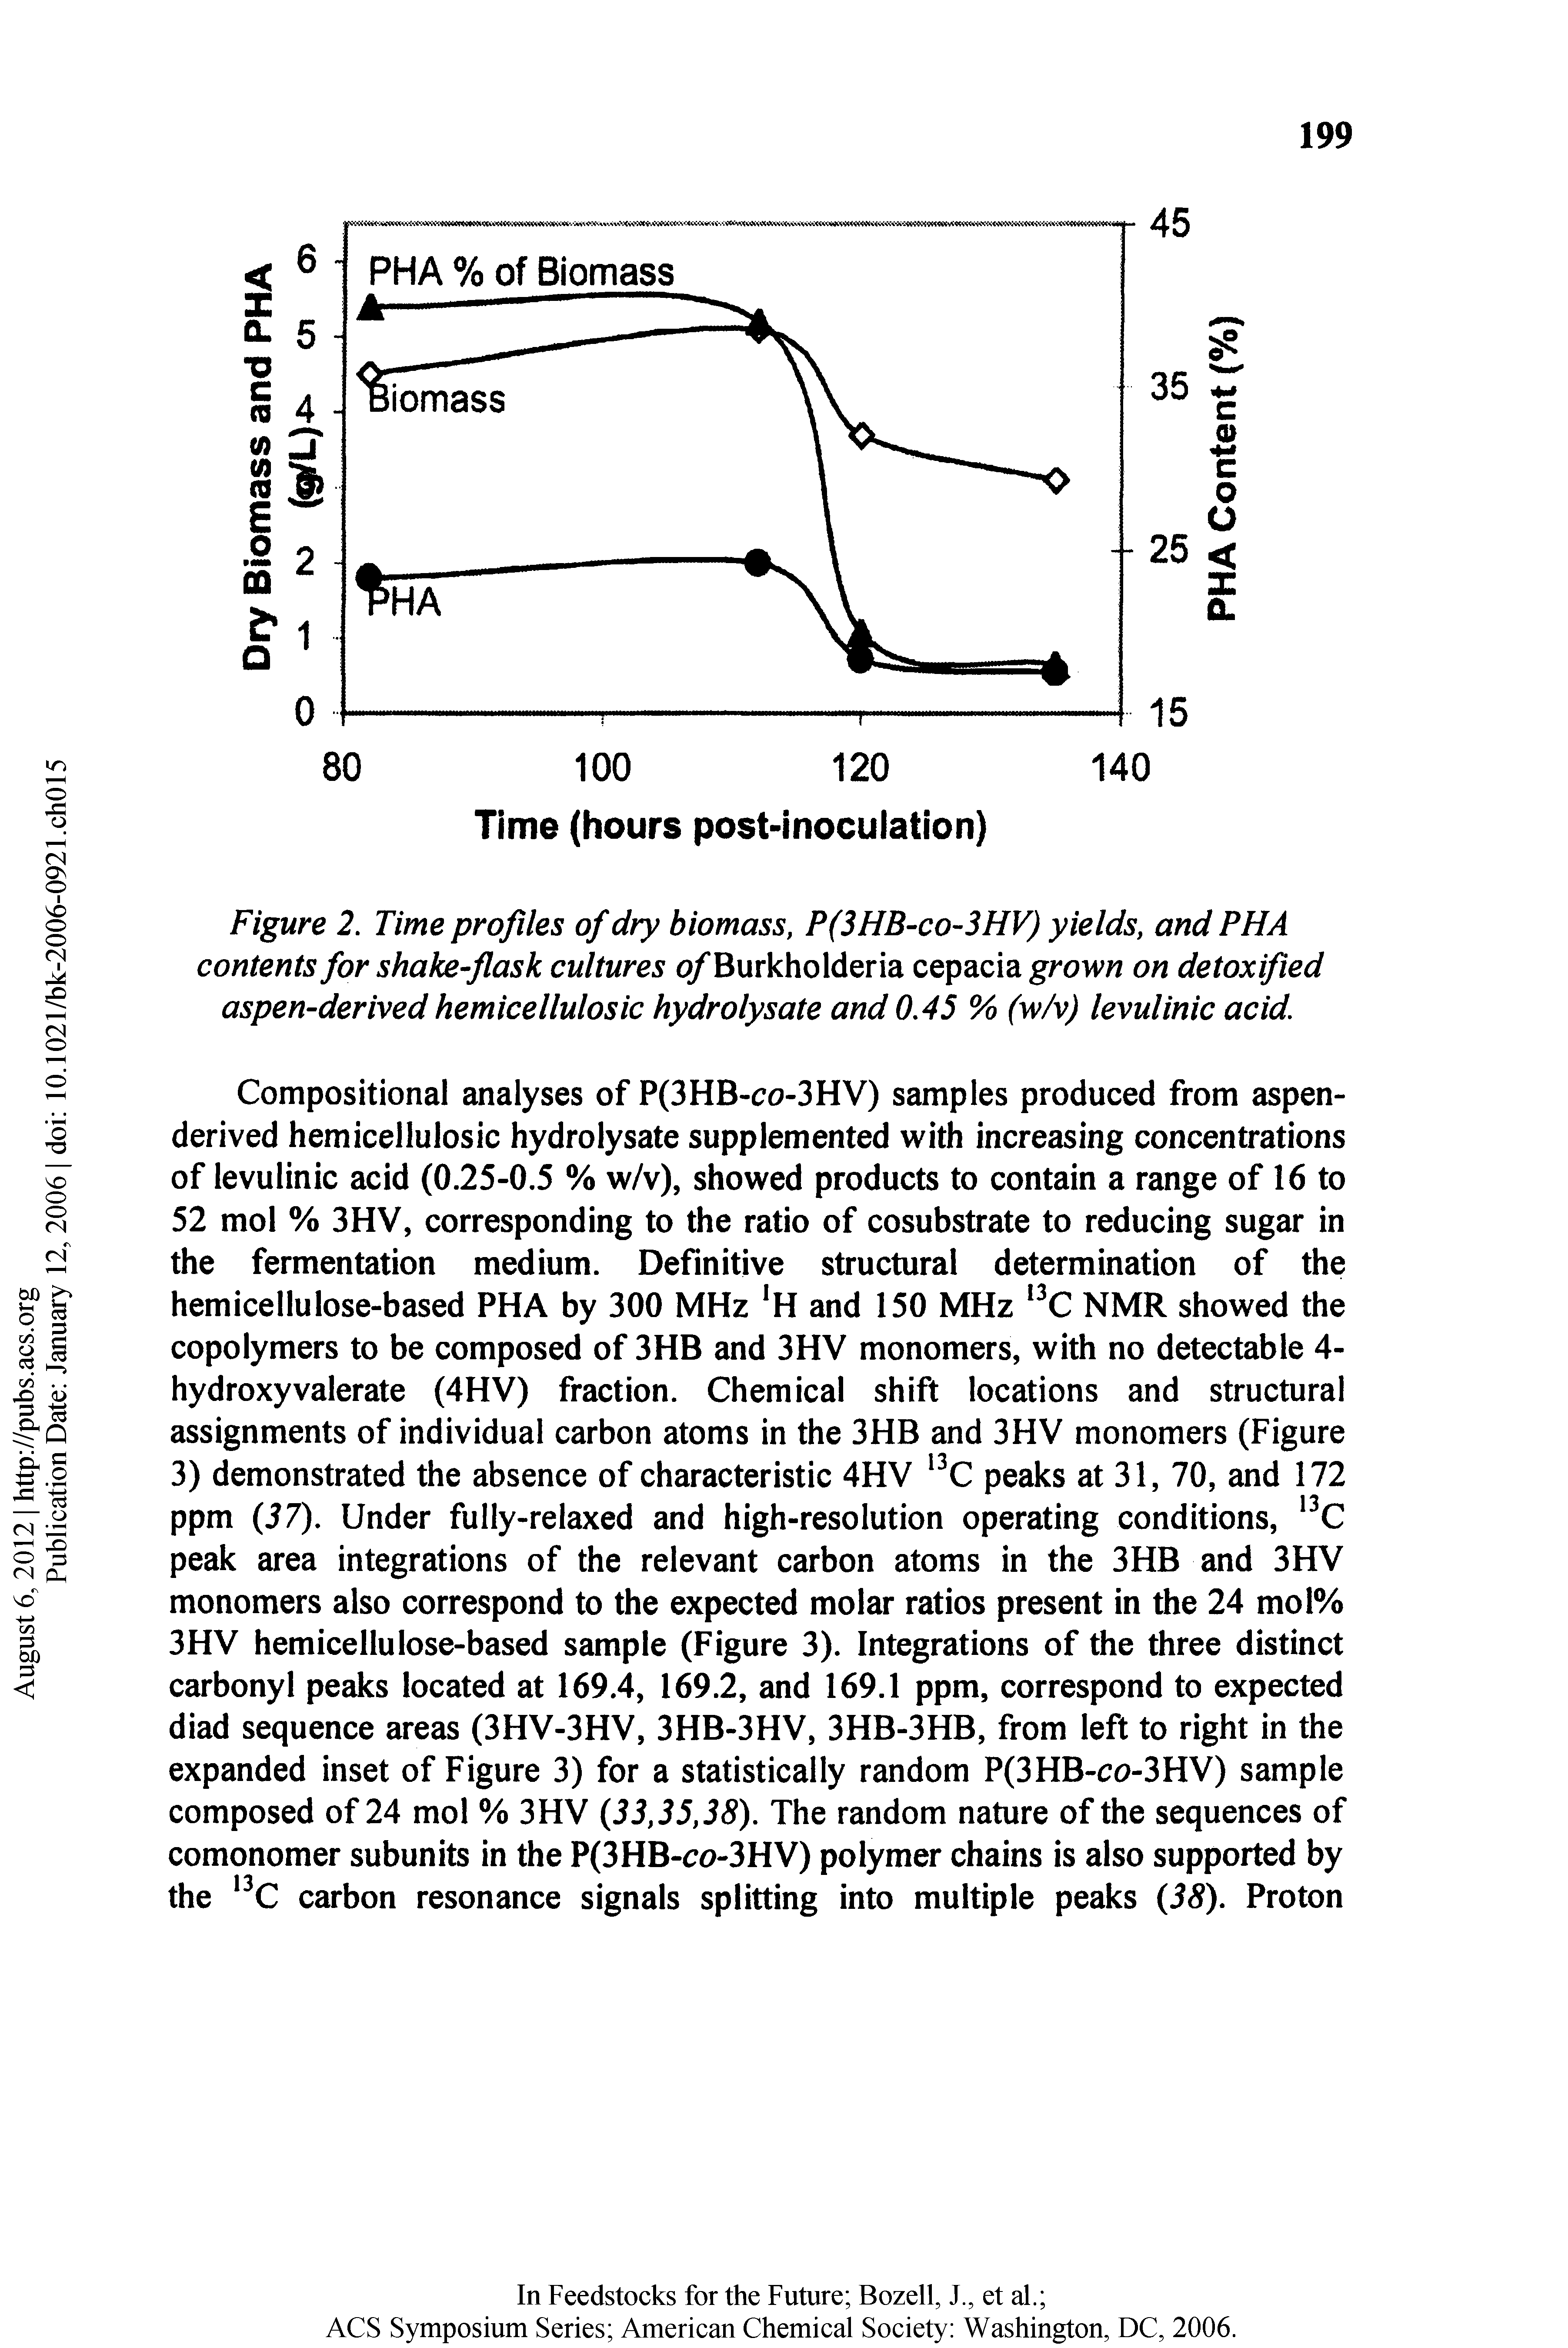 Figure 2. Time profiles of dry biomass, P(3HB-co-3HV) yields, and PHA contents for shake-flask cultures o/Burkholderia cepacia grow/ on detoxified aspen-derived hemicellulosic hydrolysate and 0.45 % (w/v) levulinic acid.